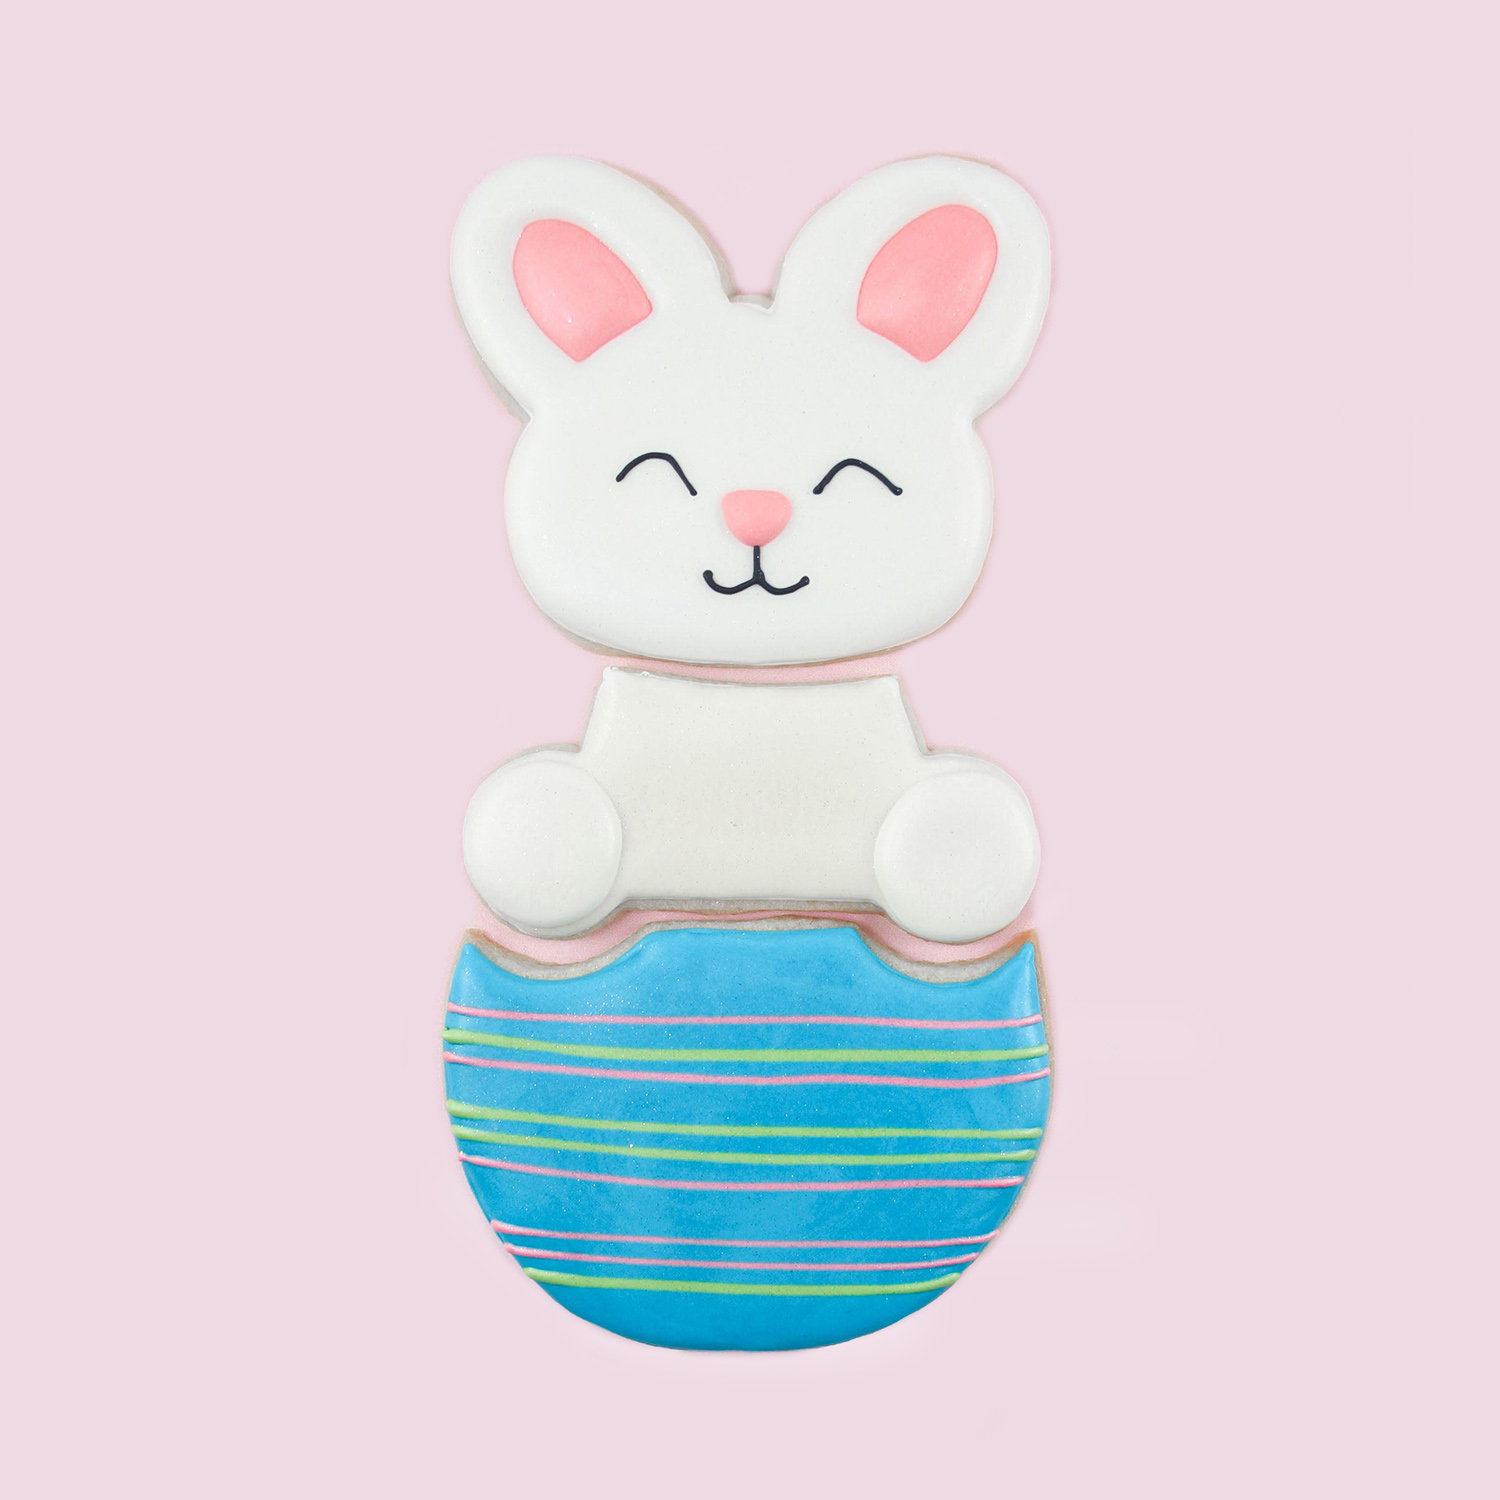 3-part royal icing decorated bunny and body in easter egg cookie